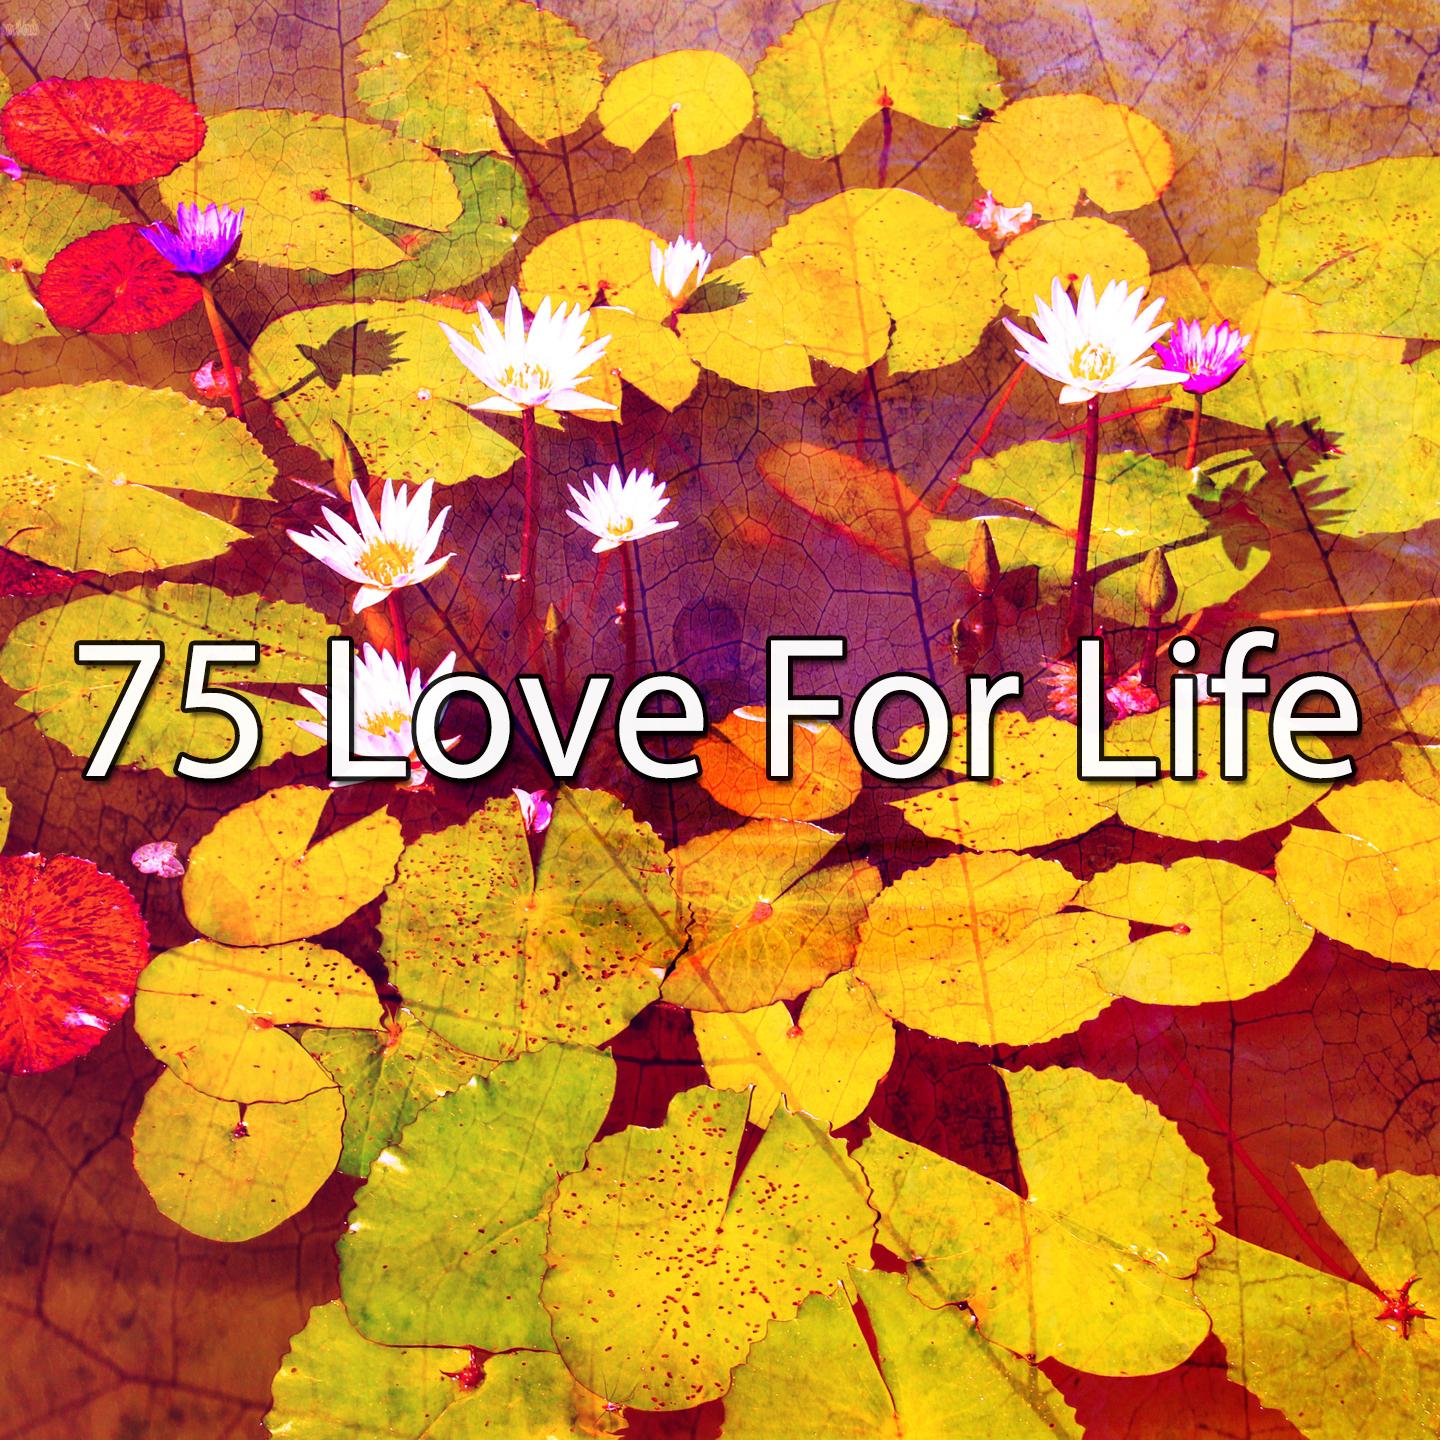 75 Love for Life